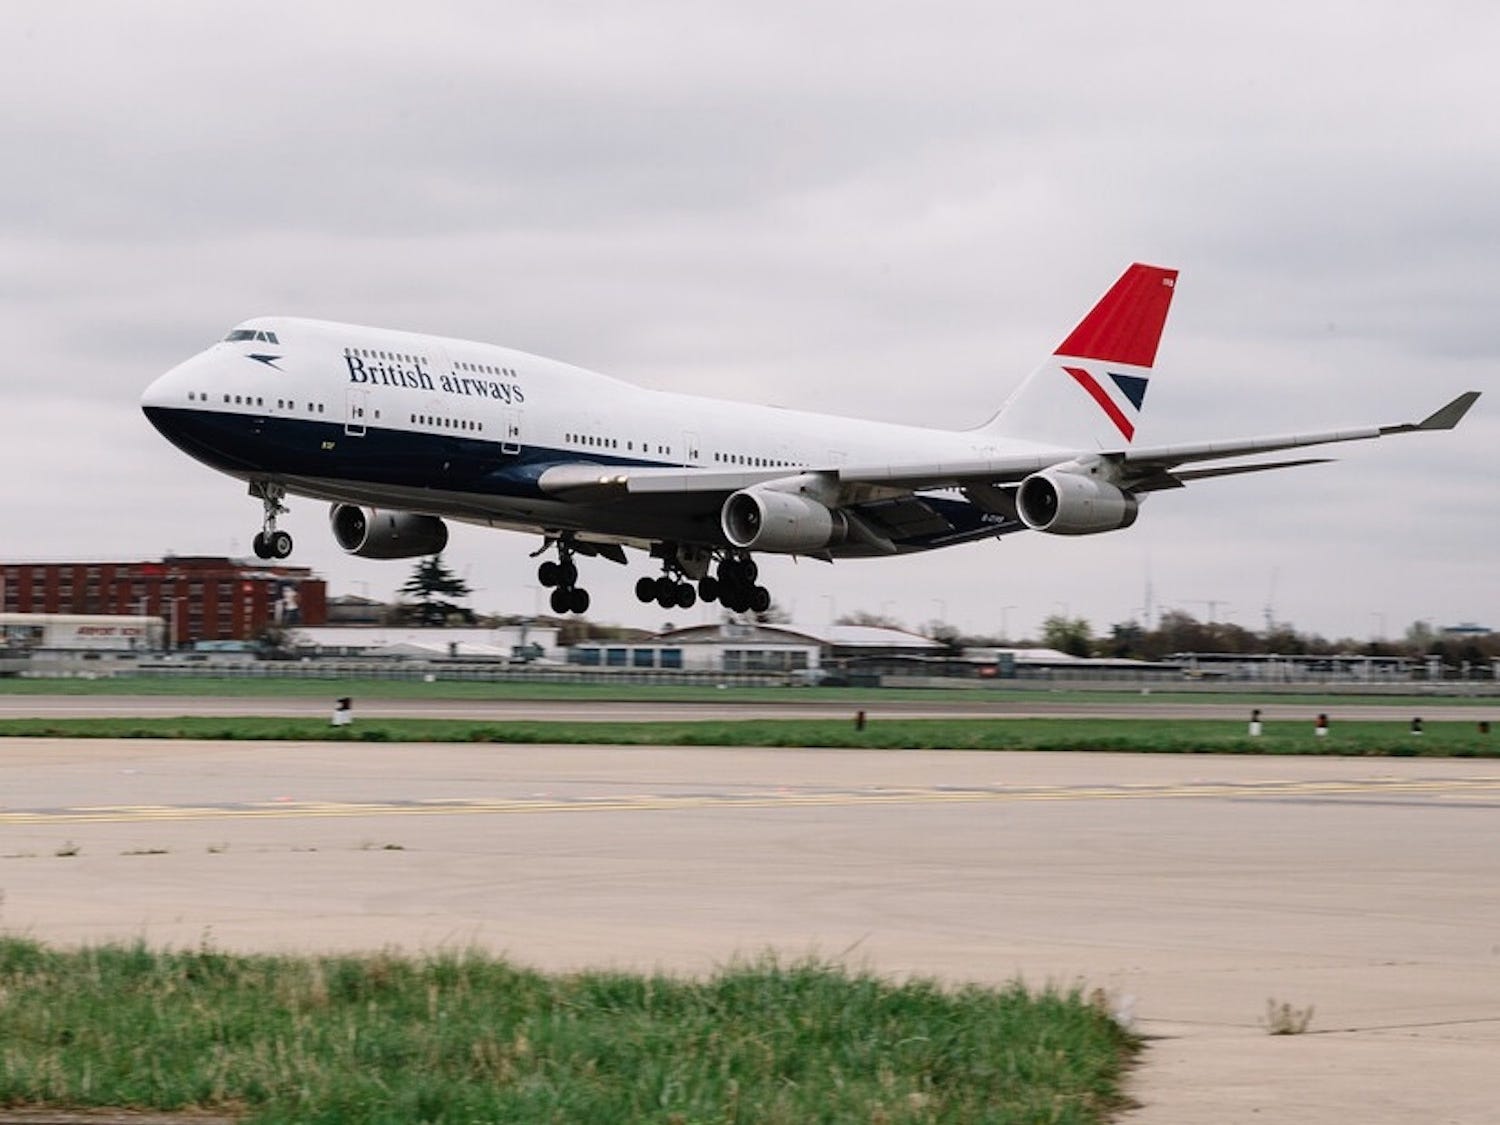 The last British Airways 747 to take off from London Heathrow.